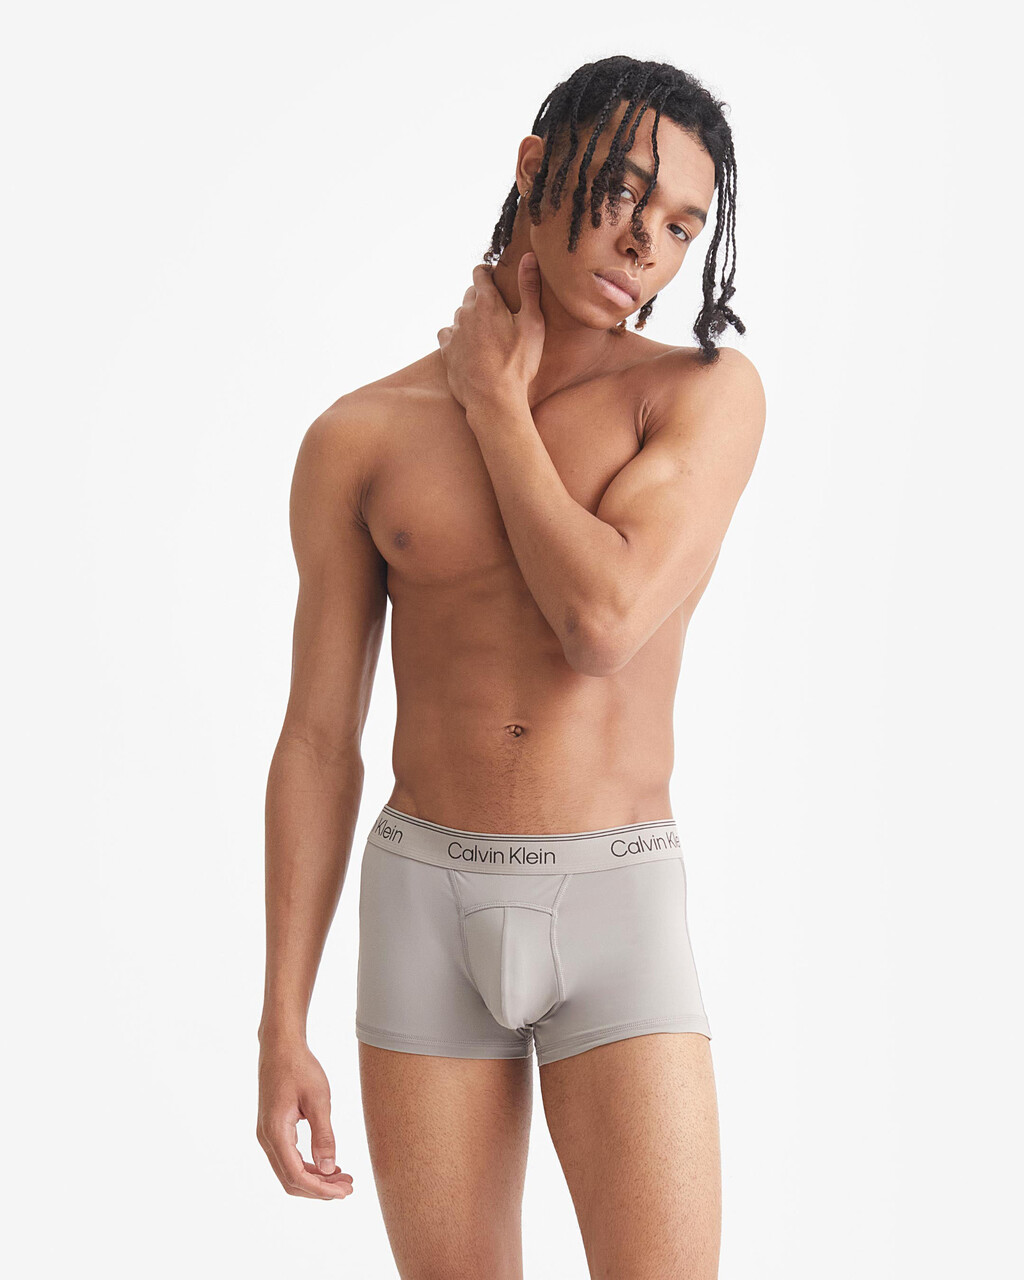 ATHLETIC MICRO LOW RISE TRUNKS, Clay Grey, hi-res